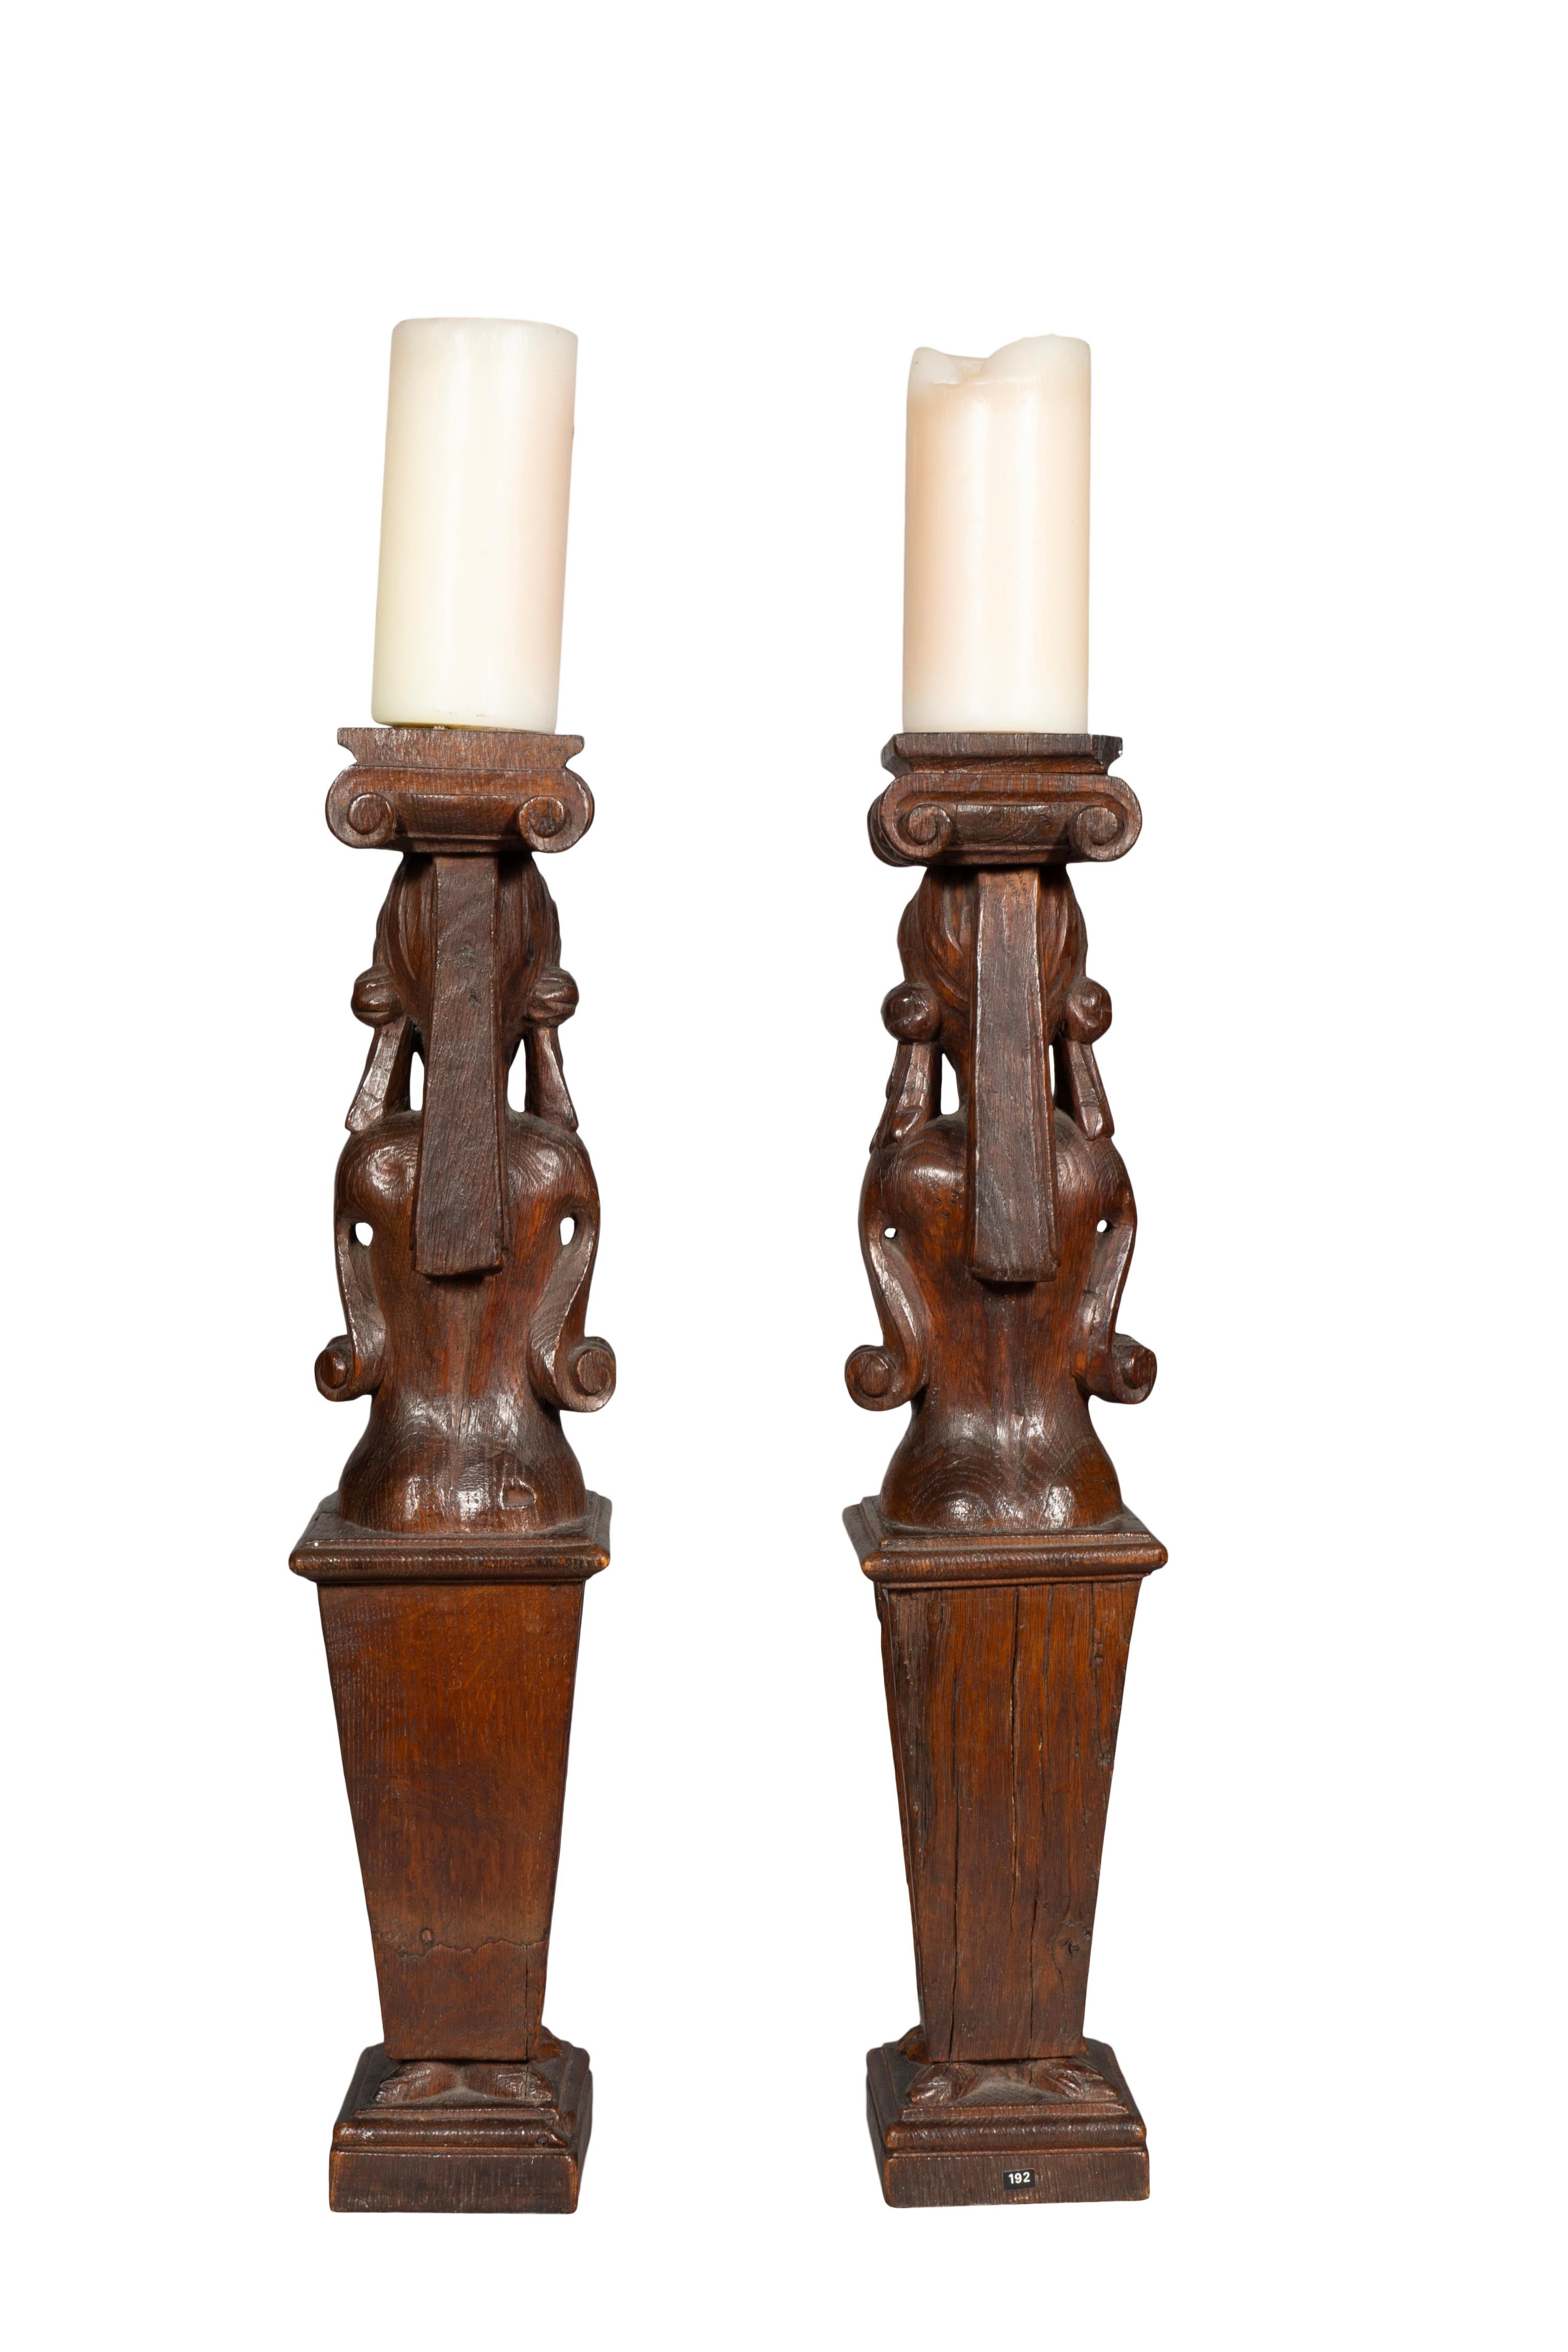 Late 17th Century Pair Of Flemish Baroque Carved Oak And Ebony Figural Caryatids For Sale